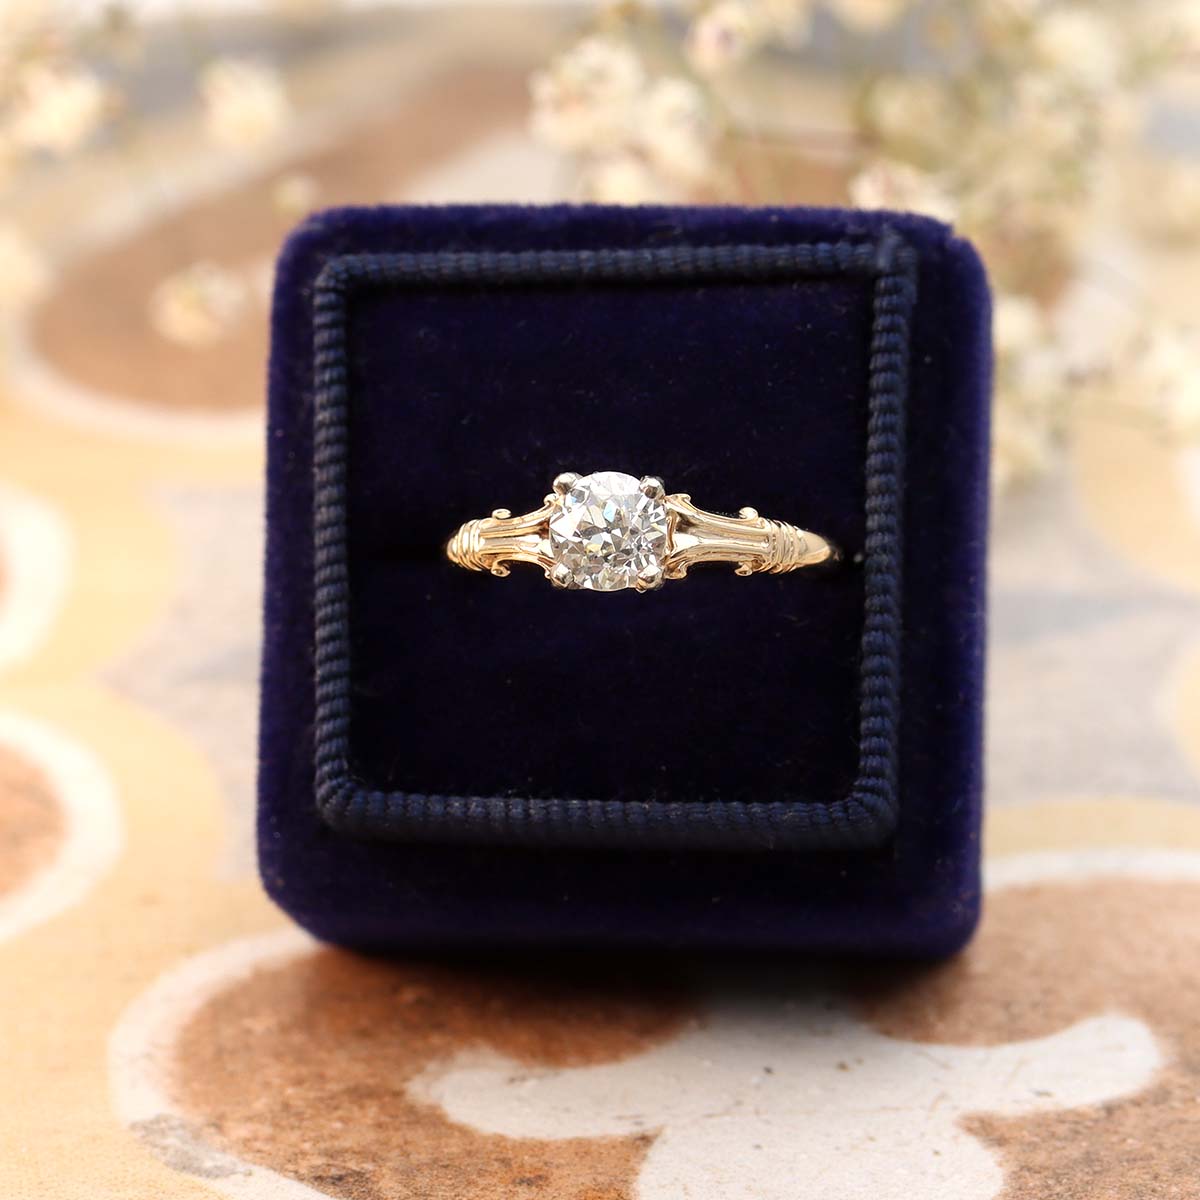 Replica Art Deco Engagement Ring set with an Antique diamond. #2591-7